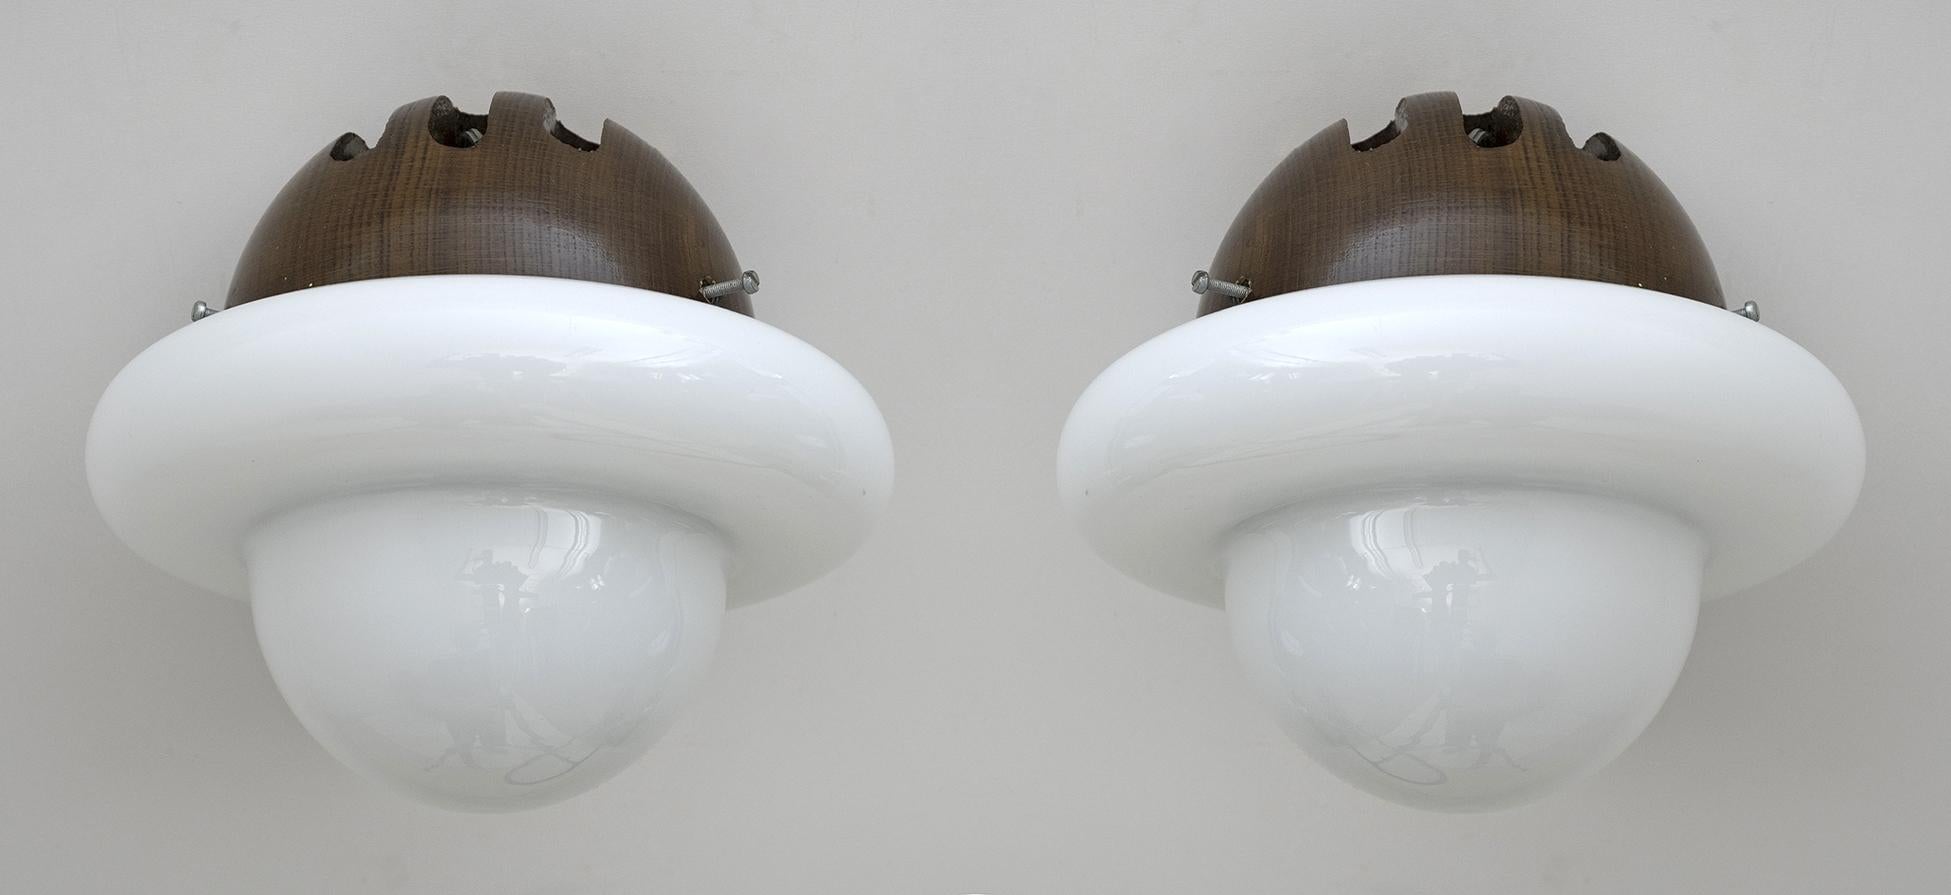 Pair of Mid-Century Modern Italian Opaline Glass and Wood Sconces, 1960s For Sale 8